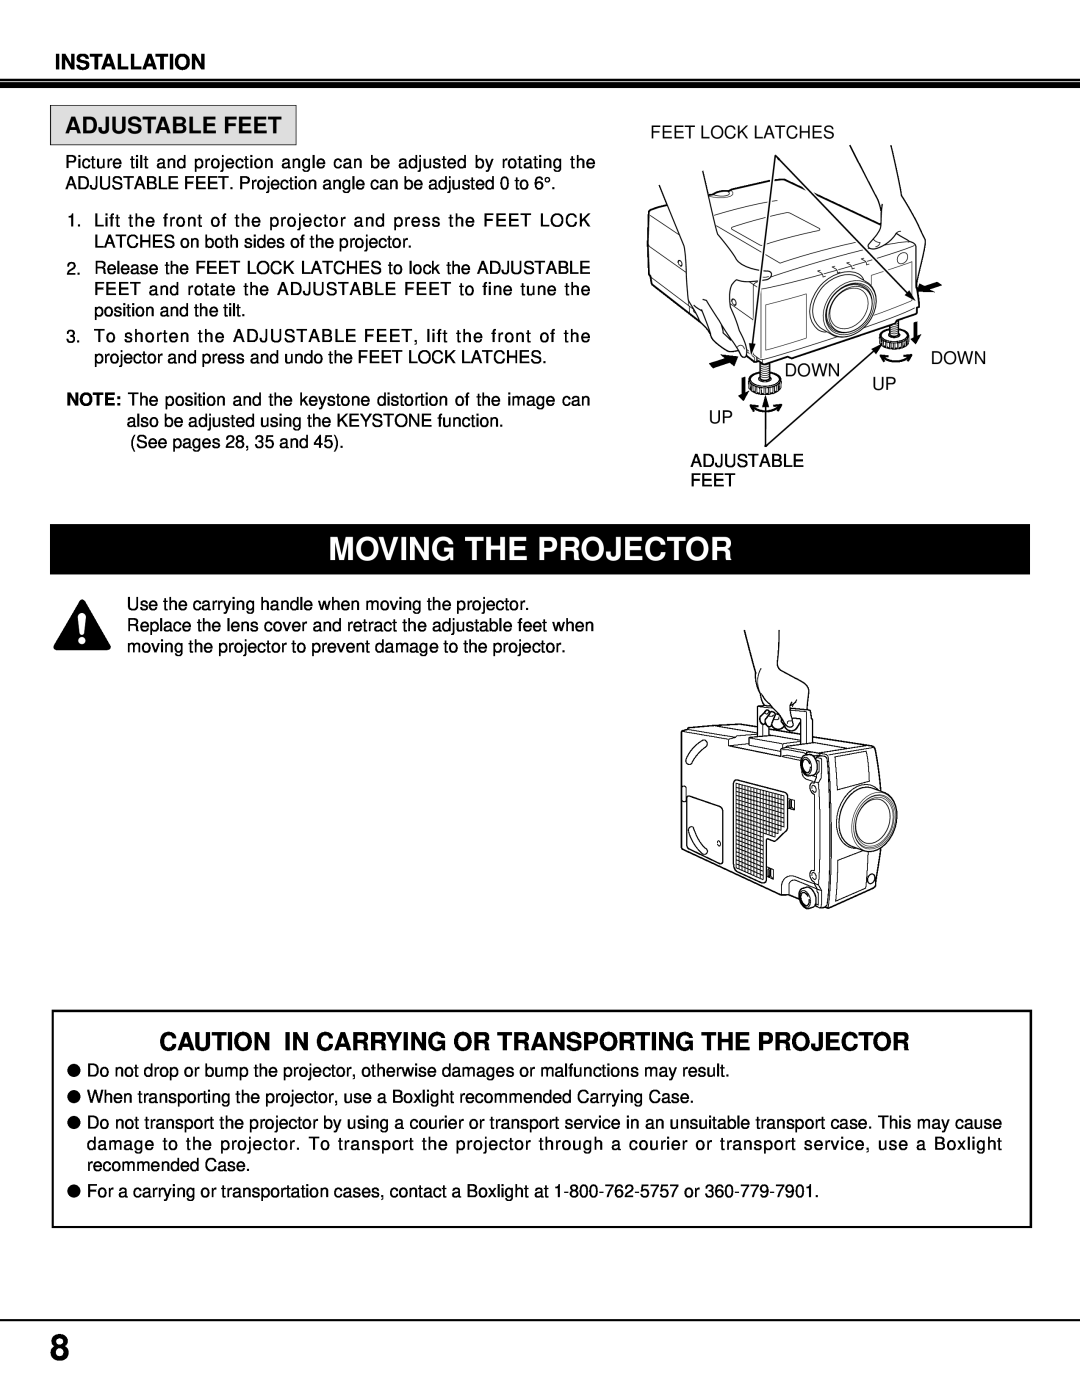 BOXLIGHT MP-37t Moving The Projector, Caution In Carrying Or Transporting The Projector, Adjustable Feet, Installation 